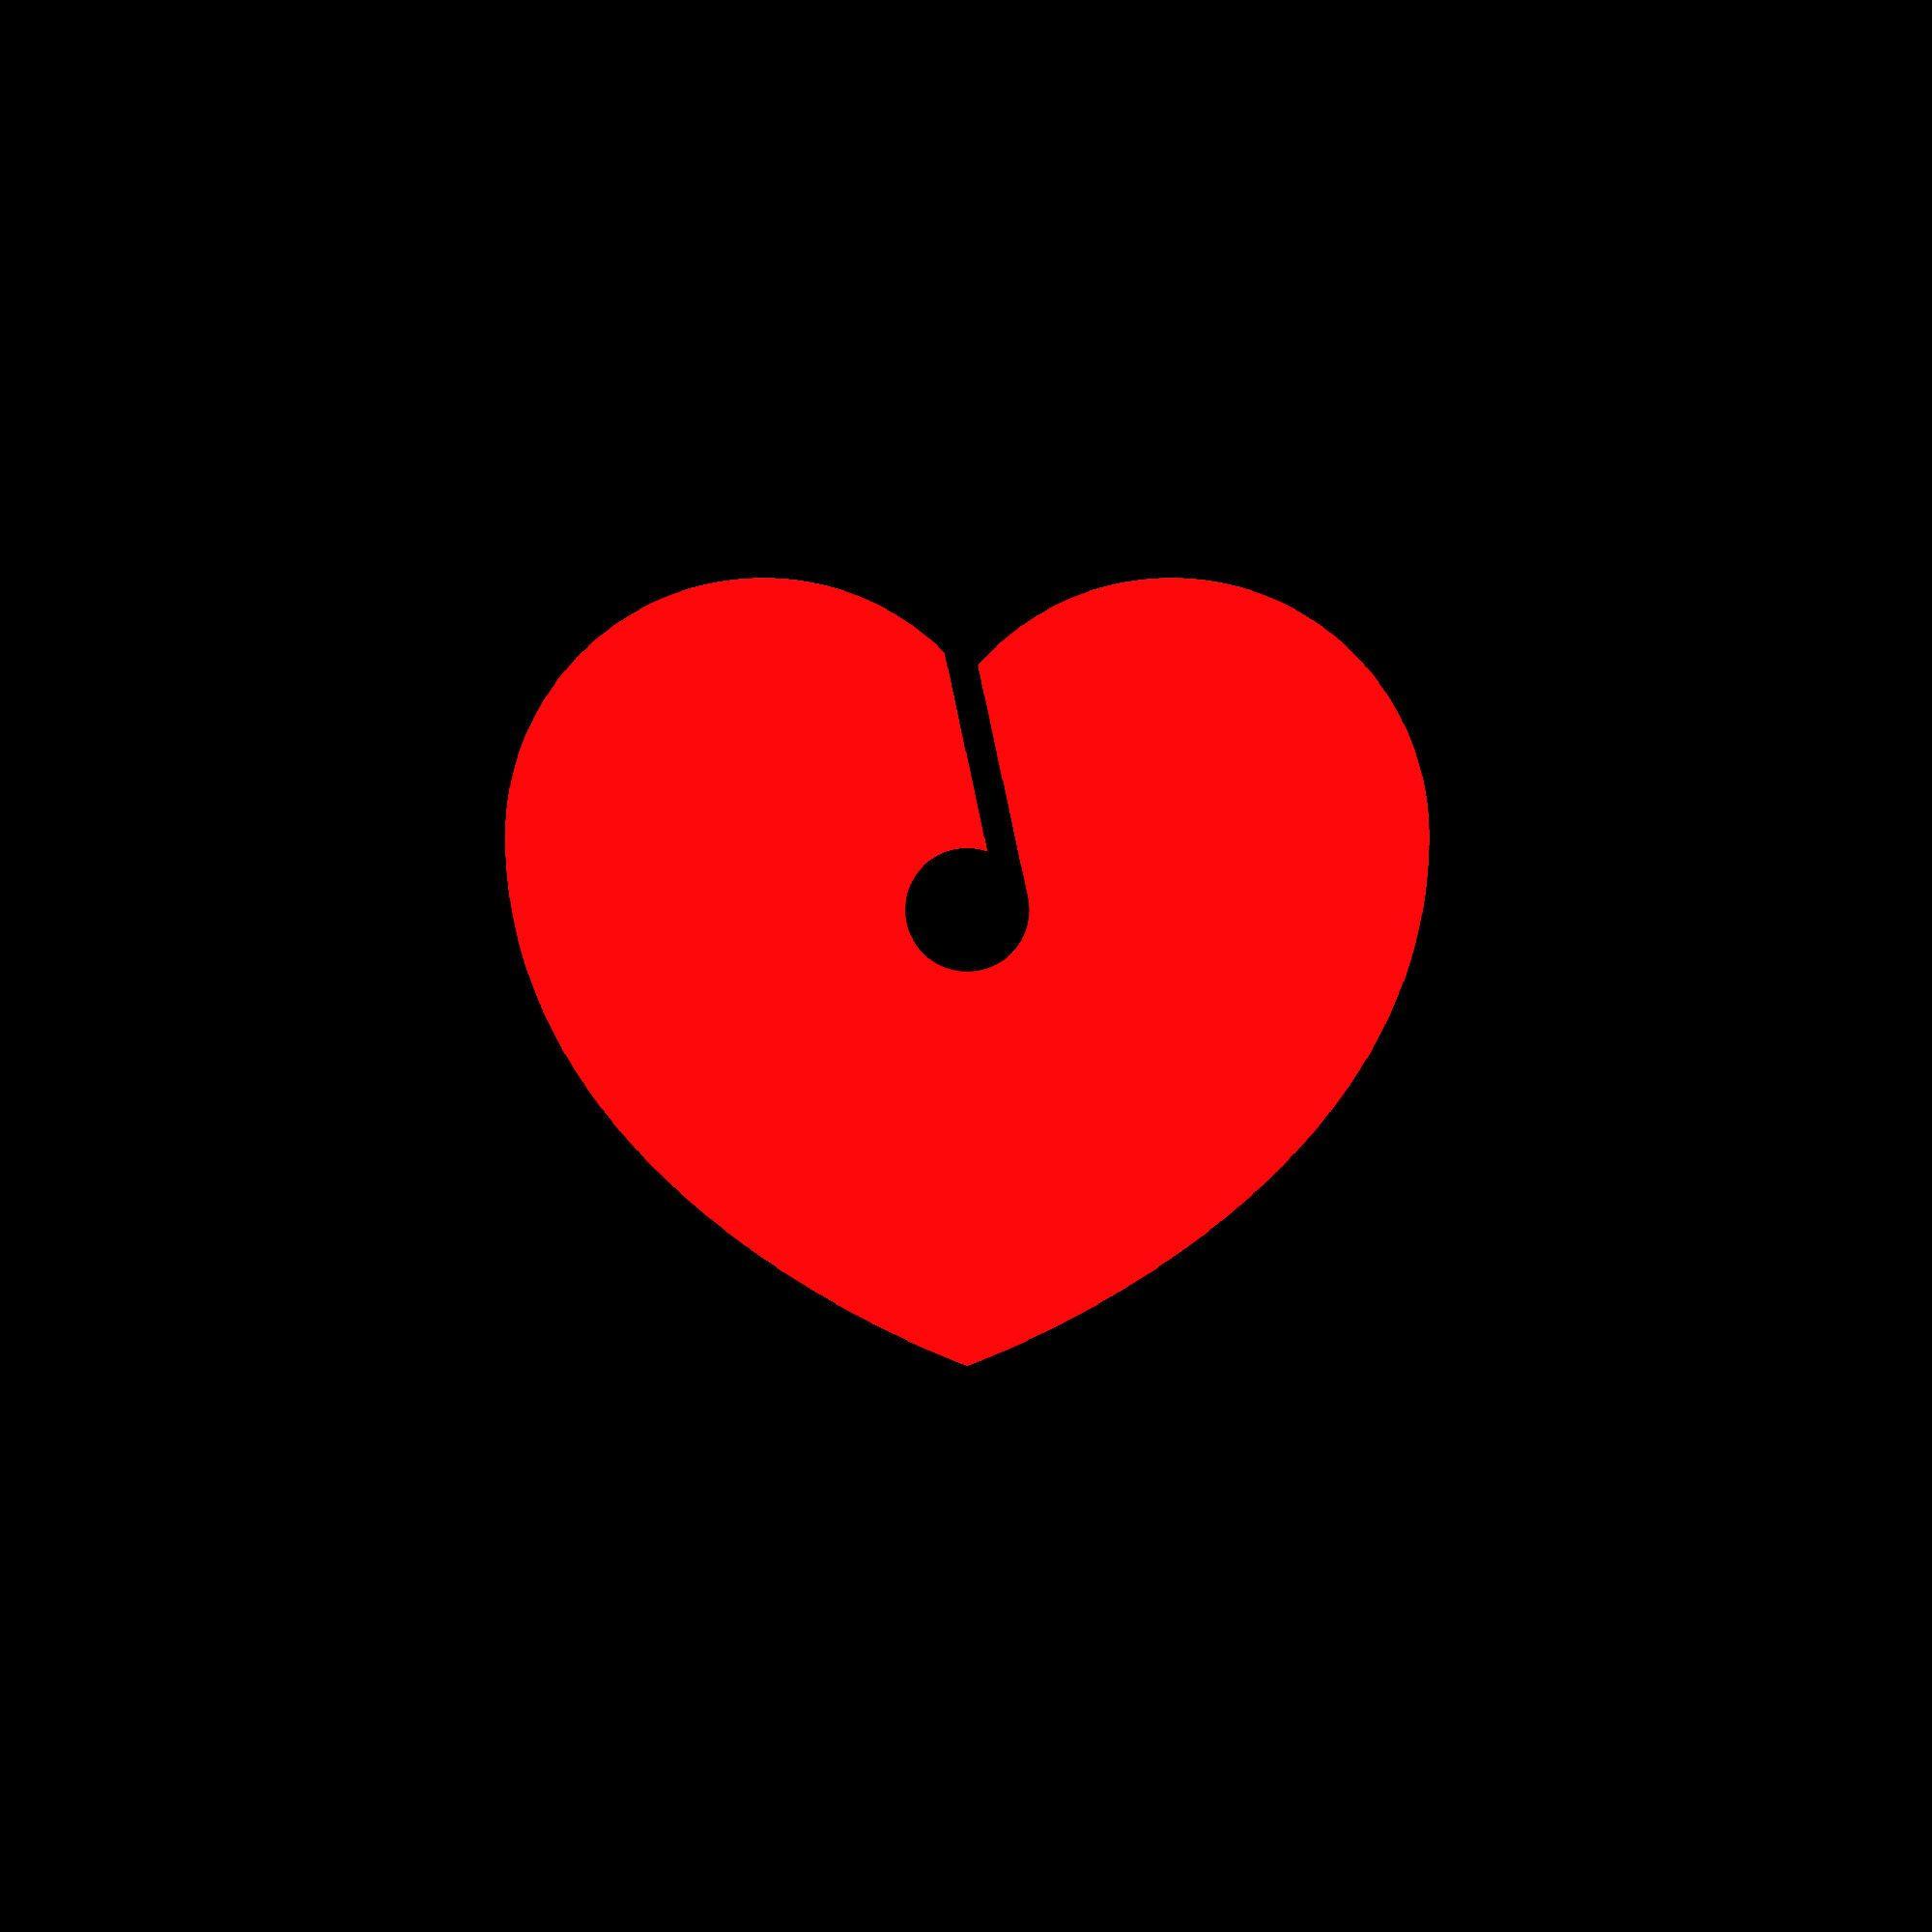 Red Heart with Black Background